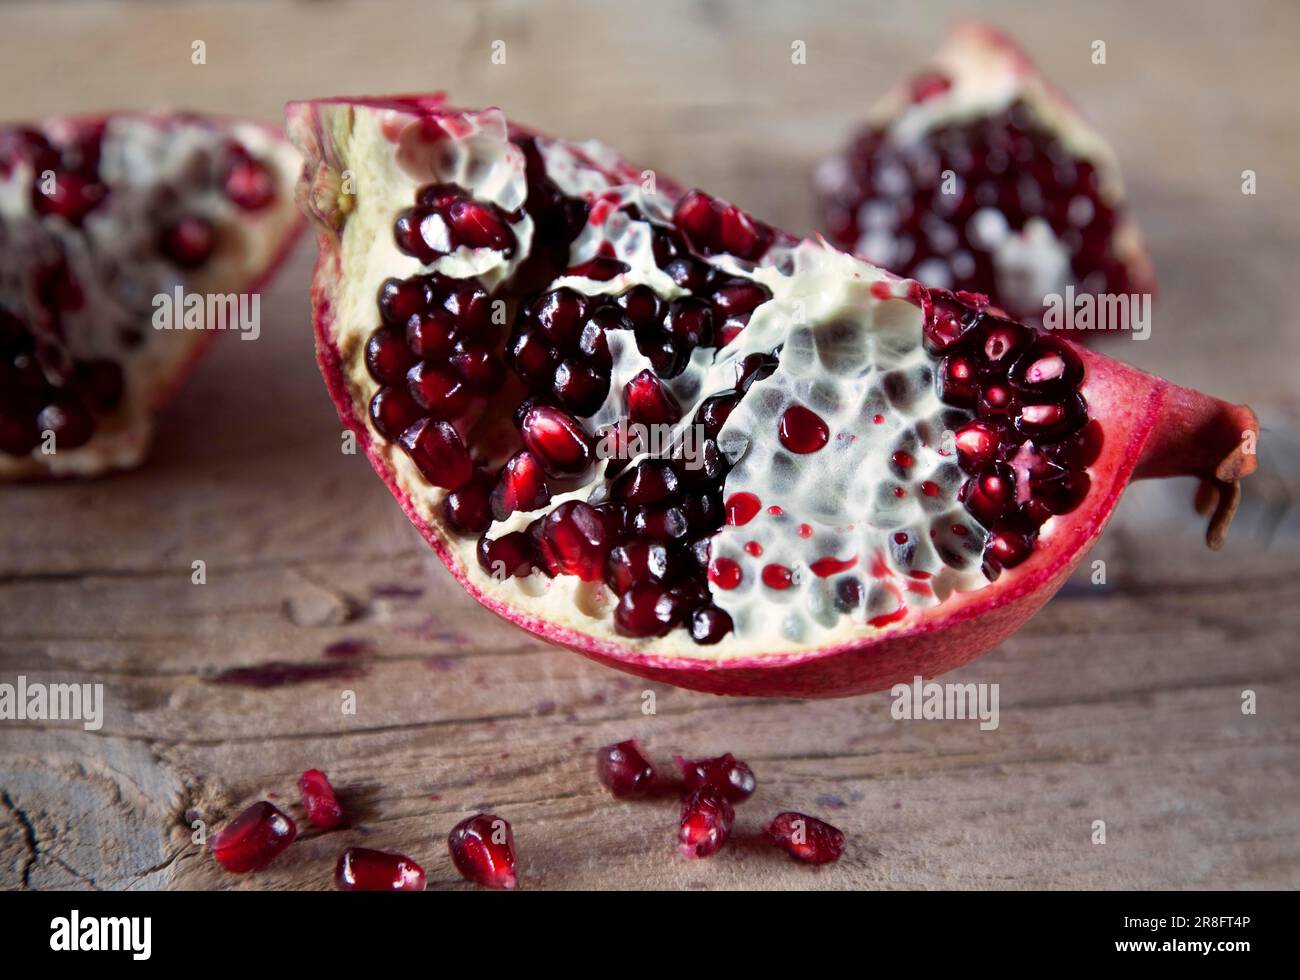 Pomegranate with seeds on brown wooden board Stock Photo